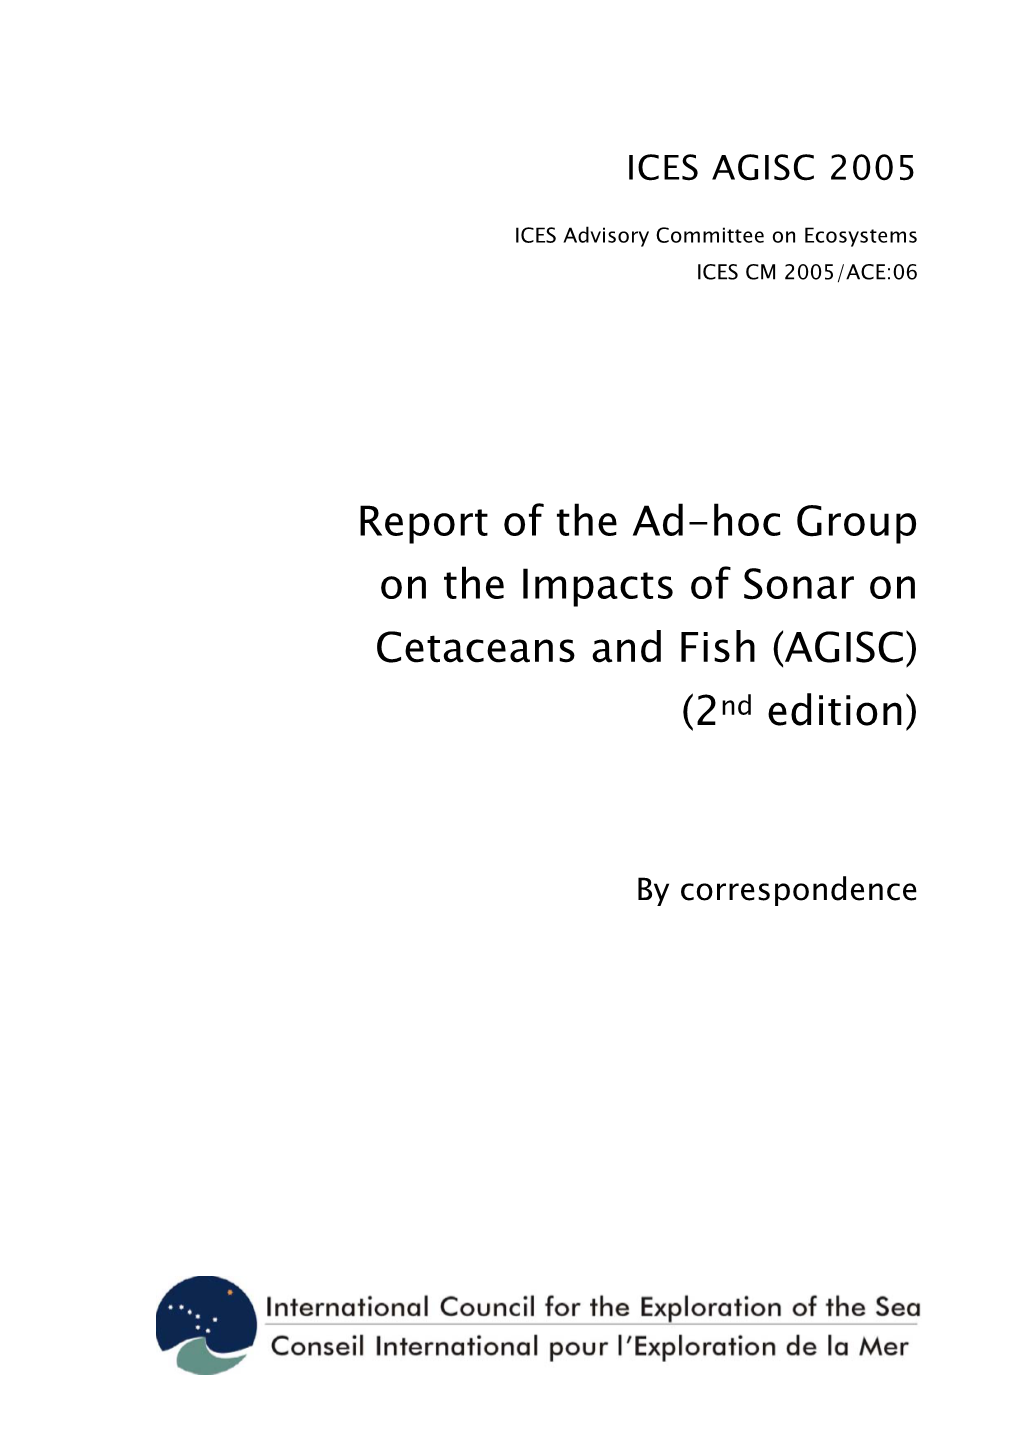 Report of the Ad-Hoc Group on the Impacts of Sonar on Cetaceans and Fish (AGISC) (2Nd Edition)